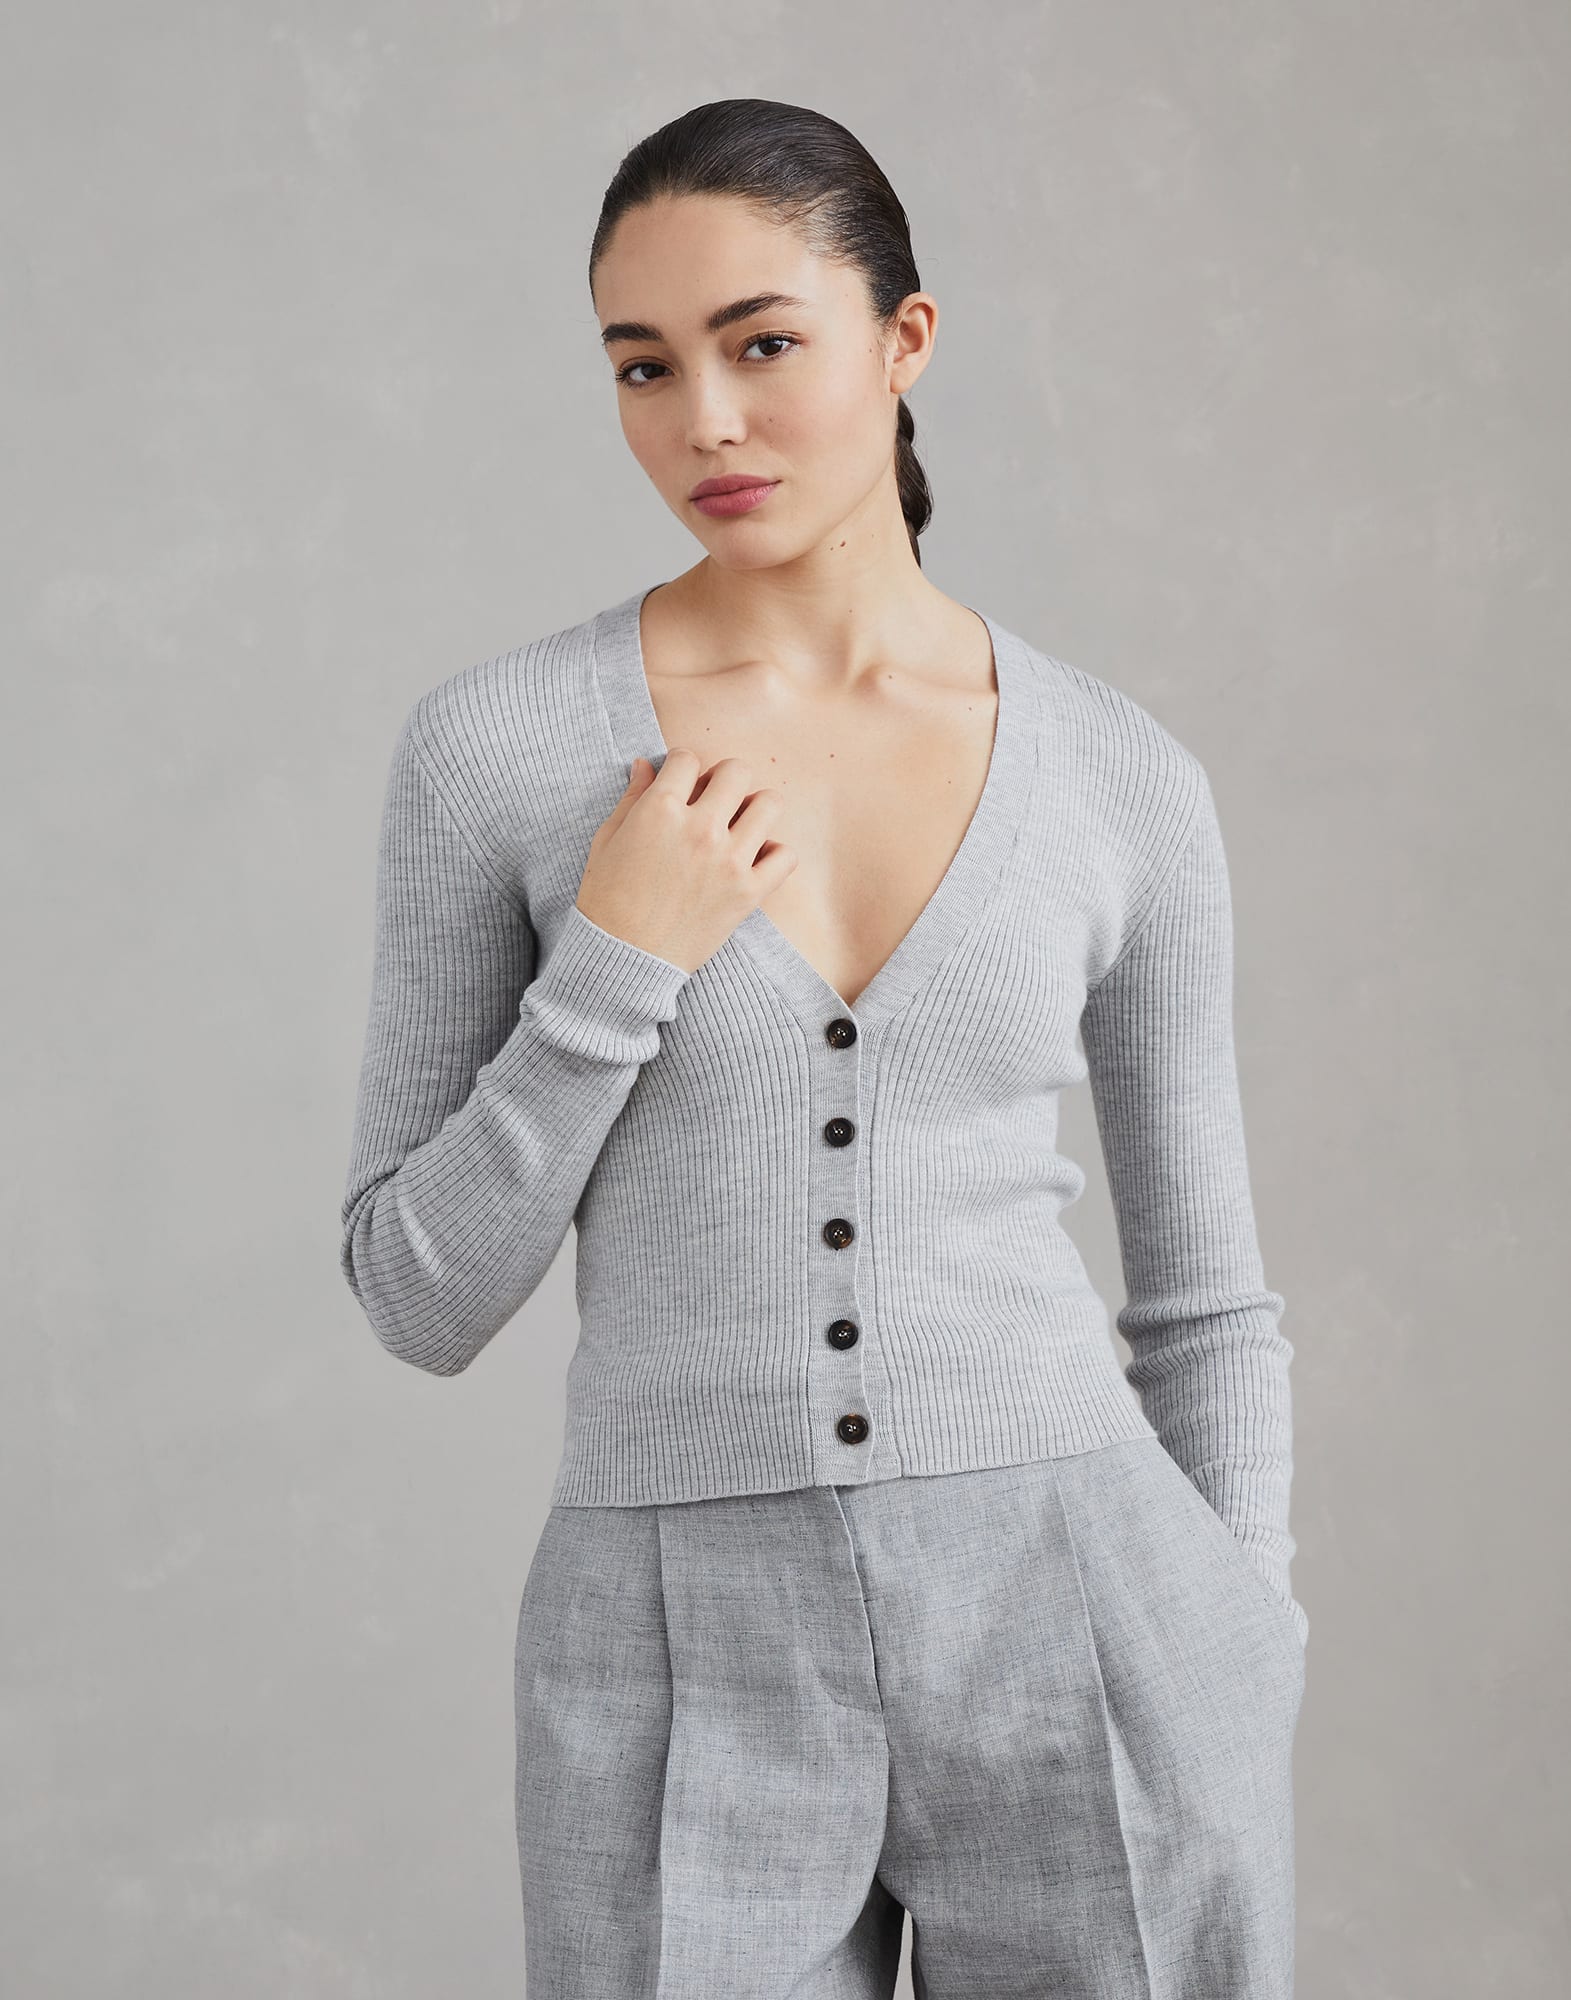 Cardigan - Front view